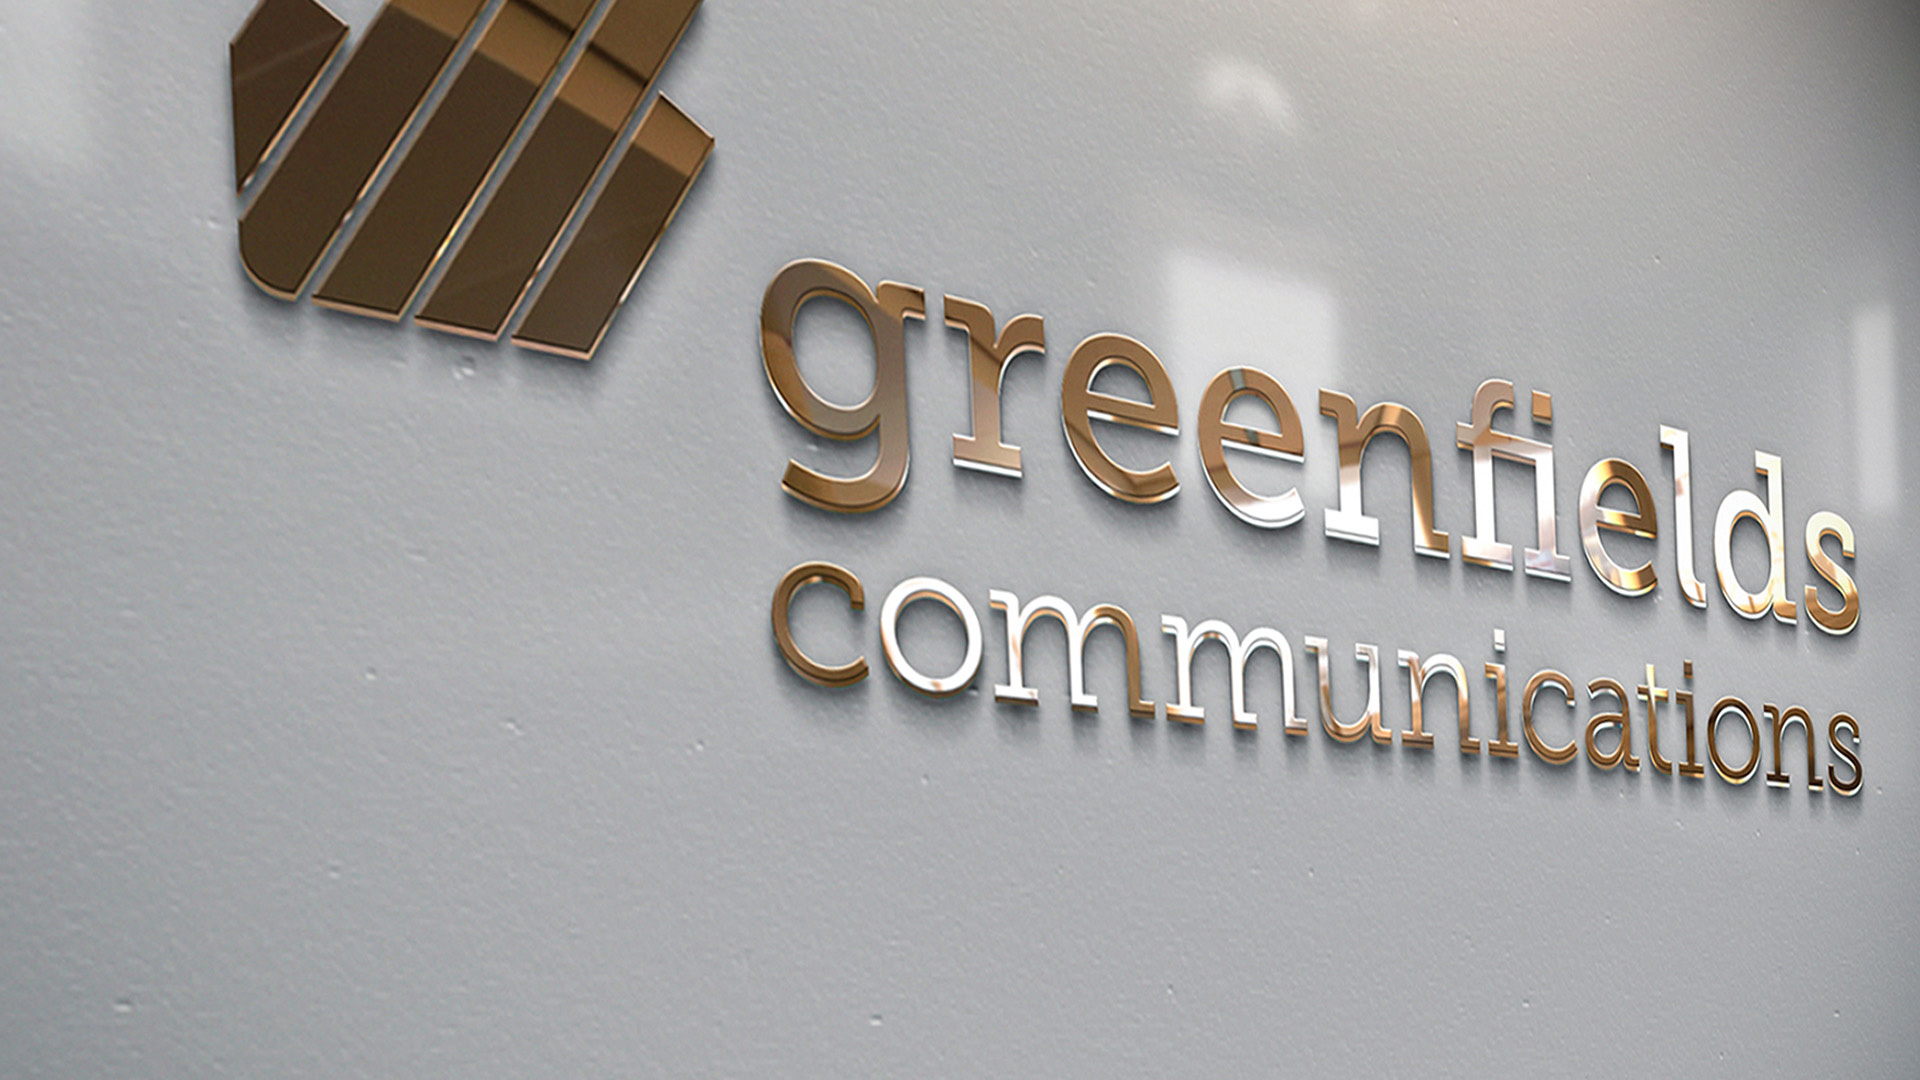 A close-up of the Greenfields Communications logo Metal Signage